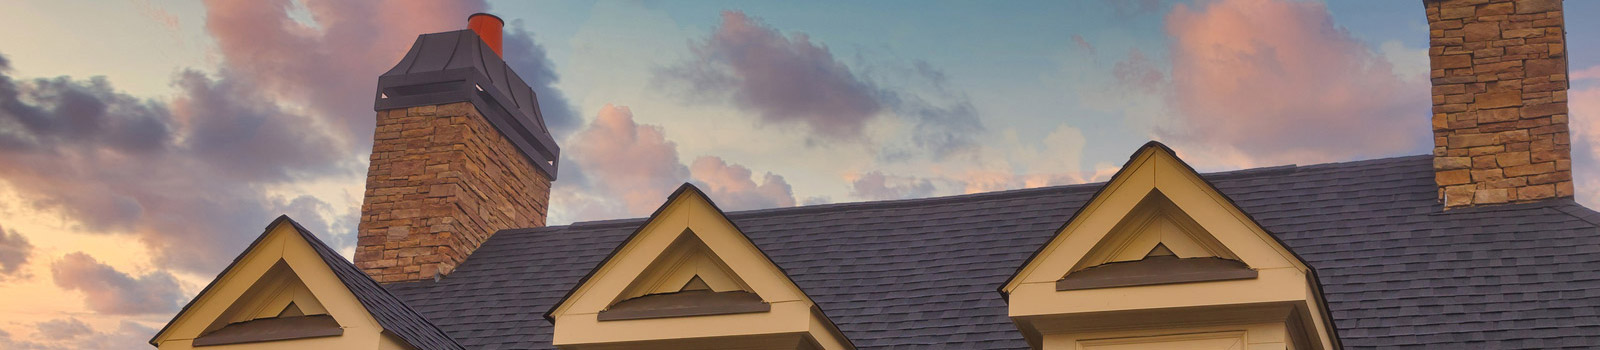 Roofing 101: Everything an Idaho home owner needs to know about roofing and hiring a roofing company.